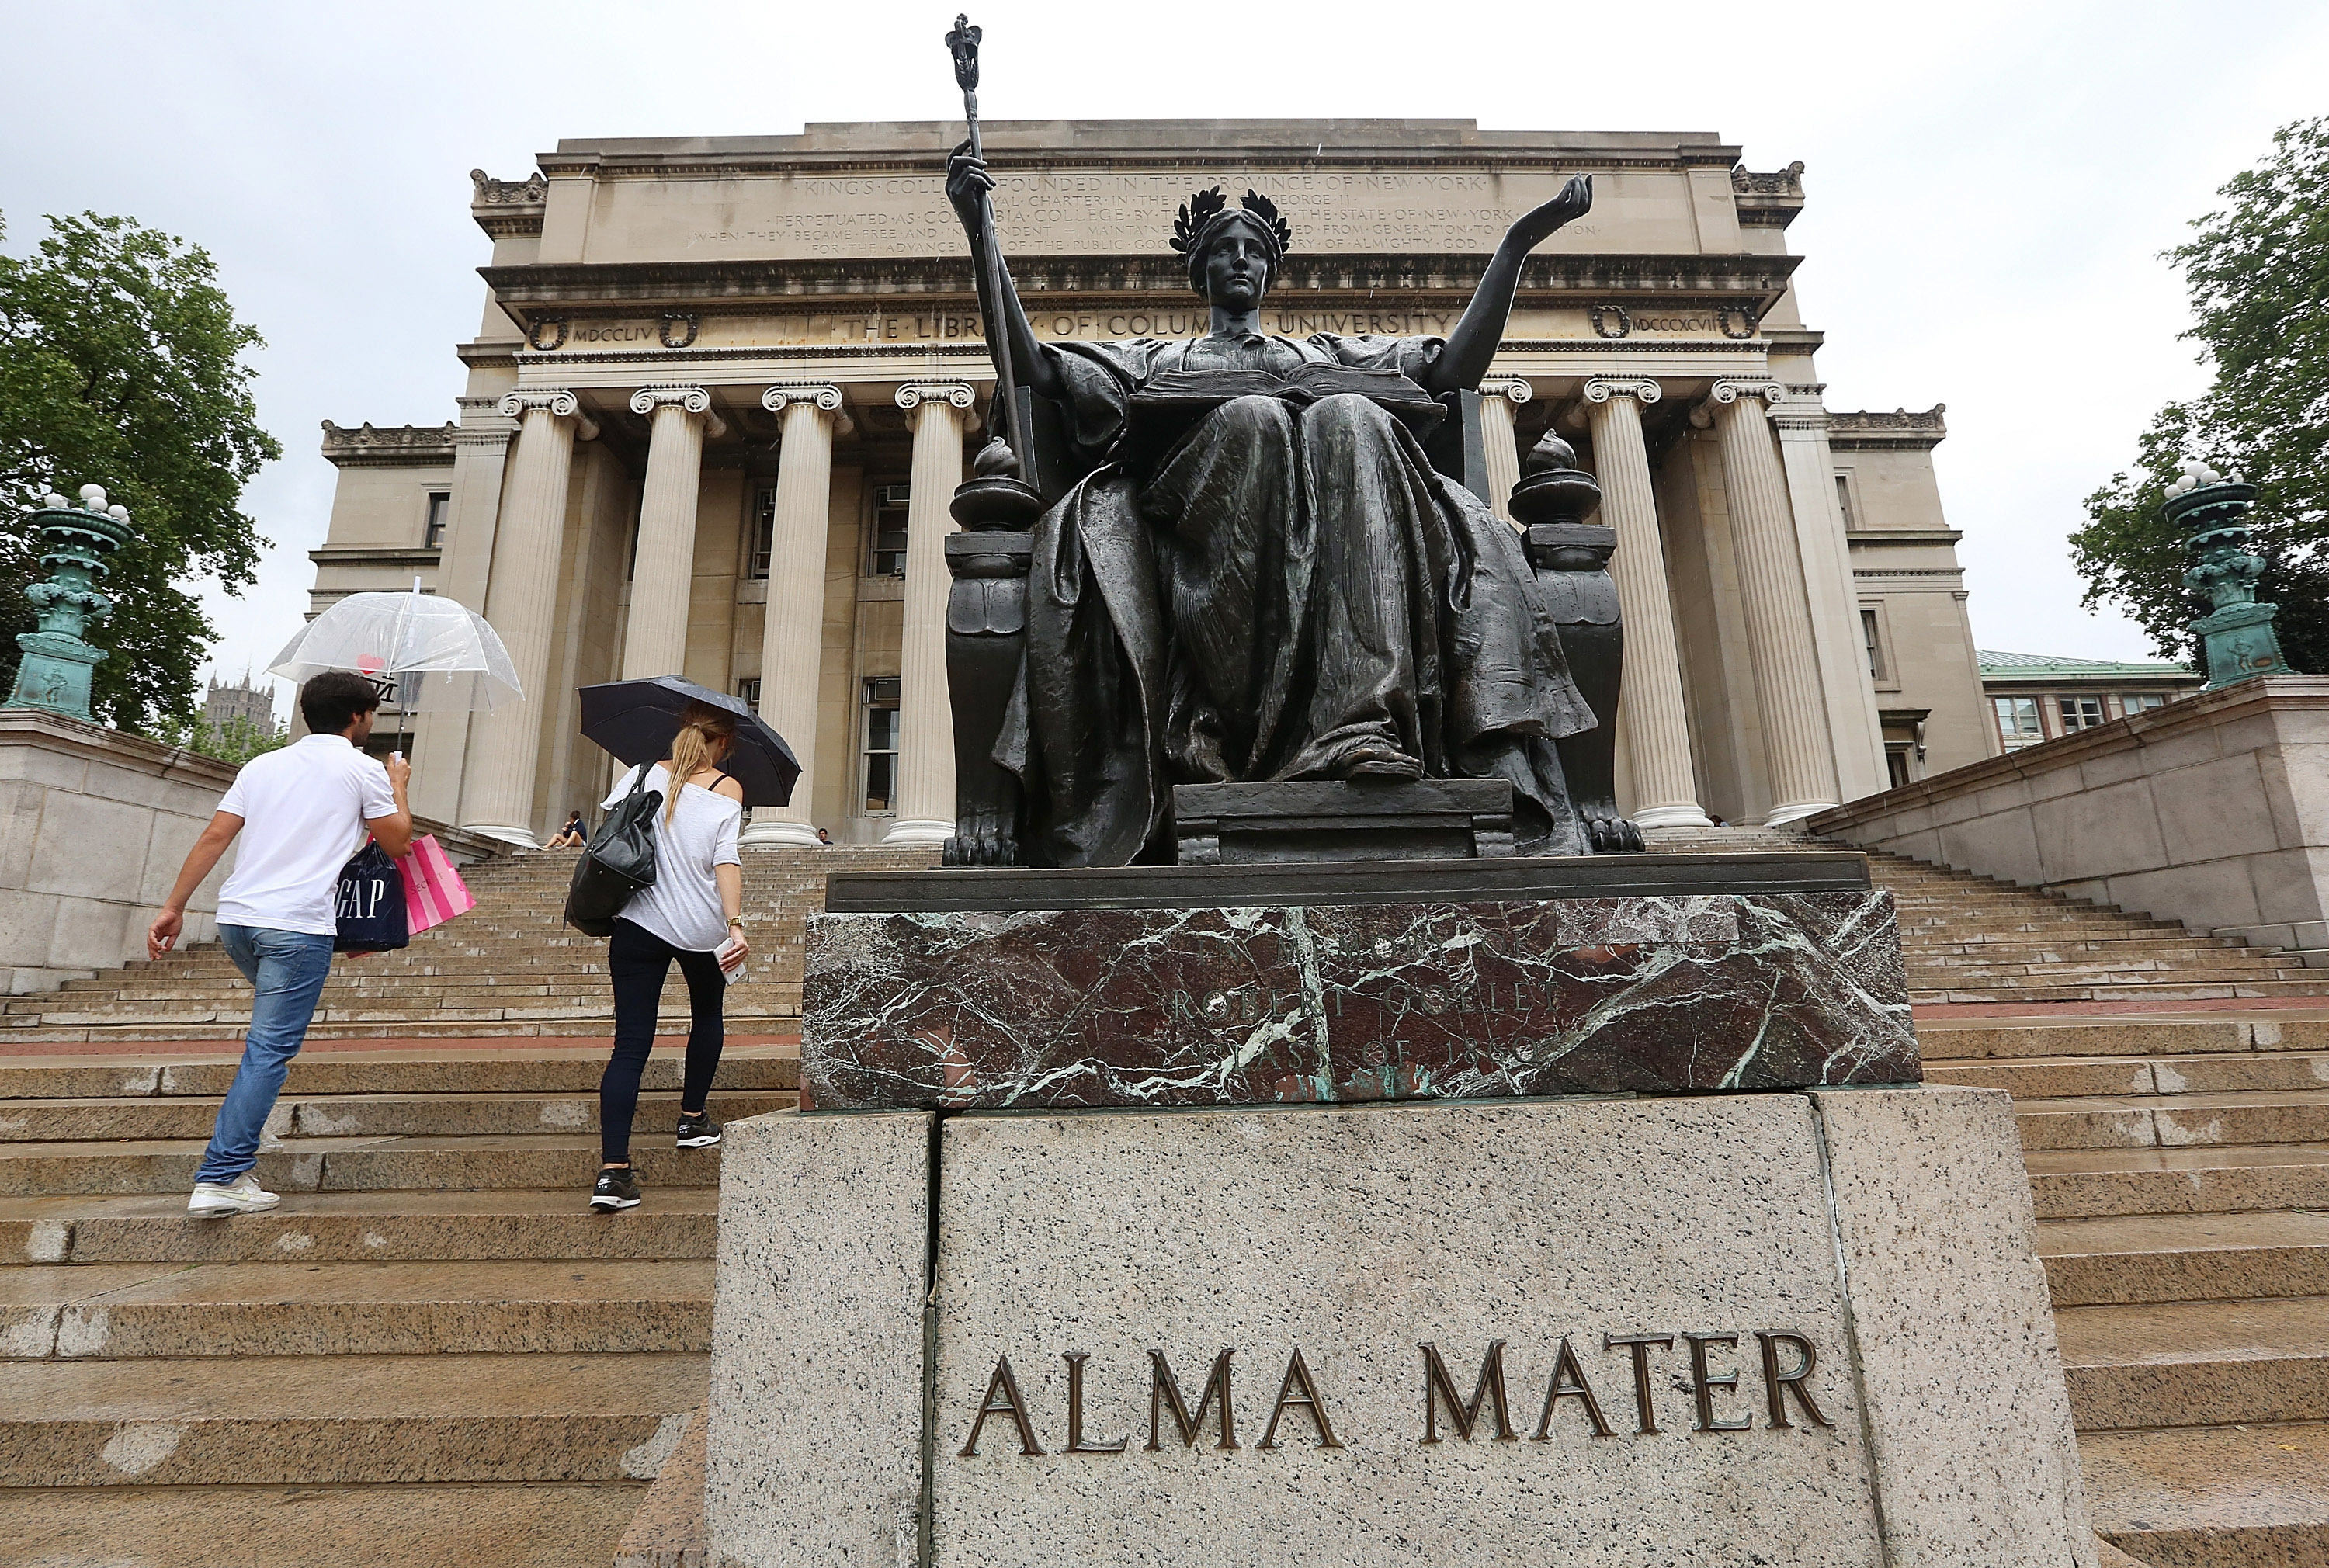 People walk past the Alma Mater statue on the Columbia University campus on July 1, 2013 in New York City. (Mario Tama—Getty Images)